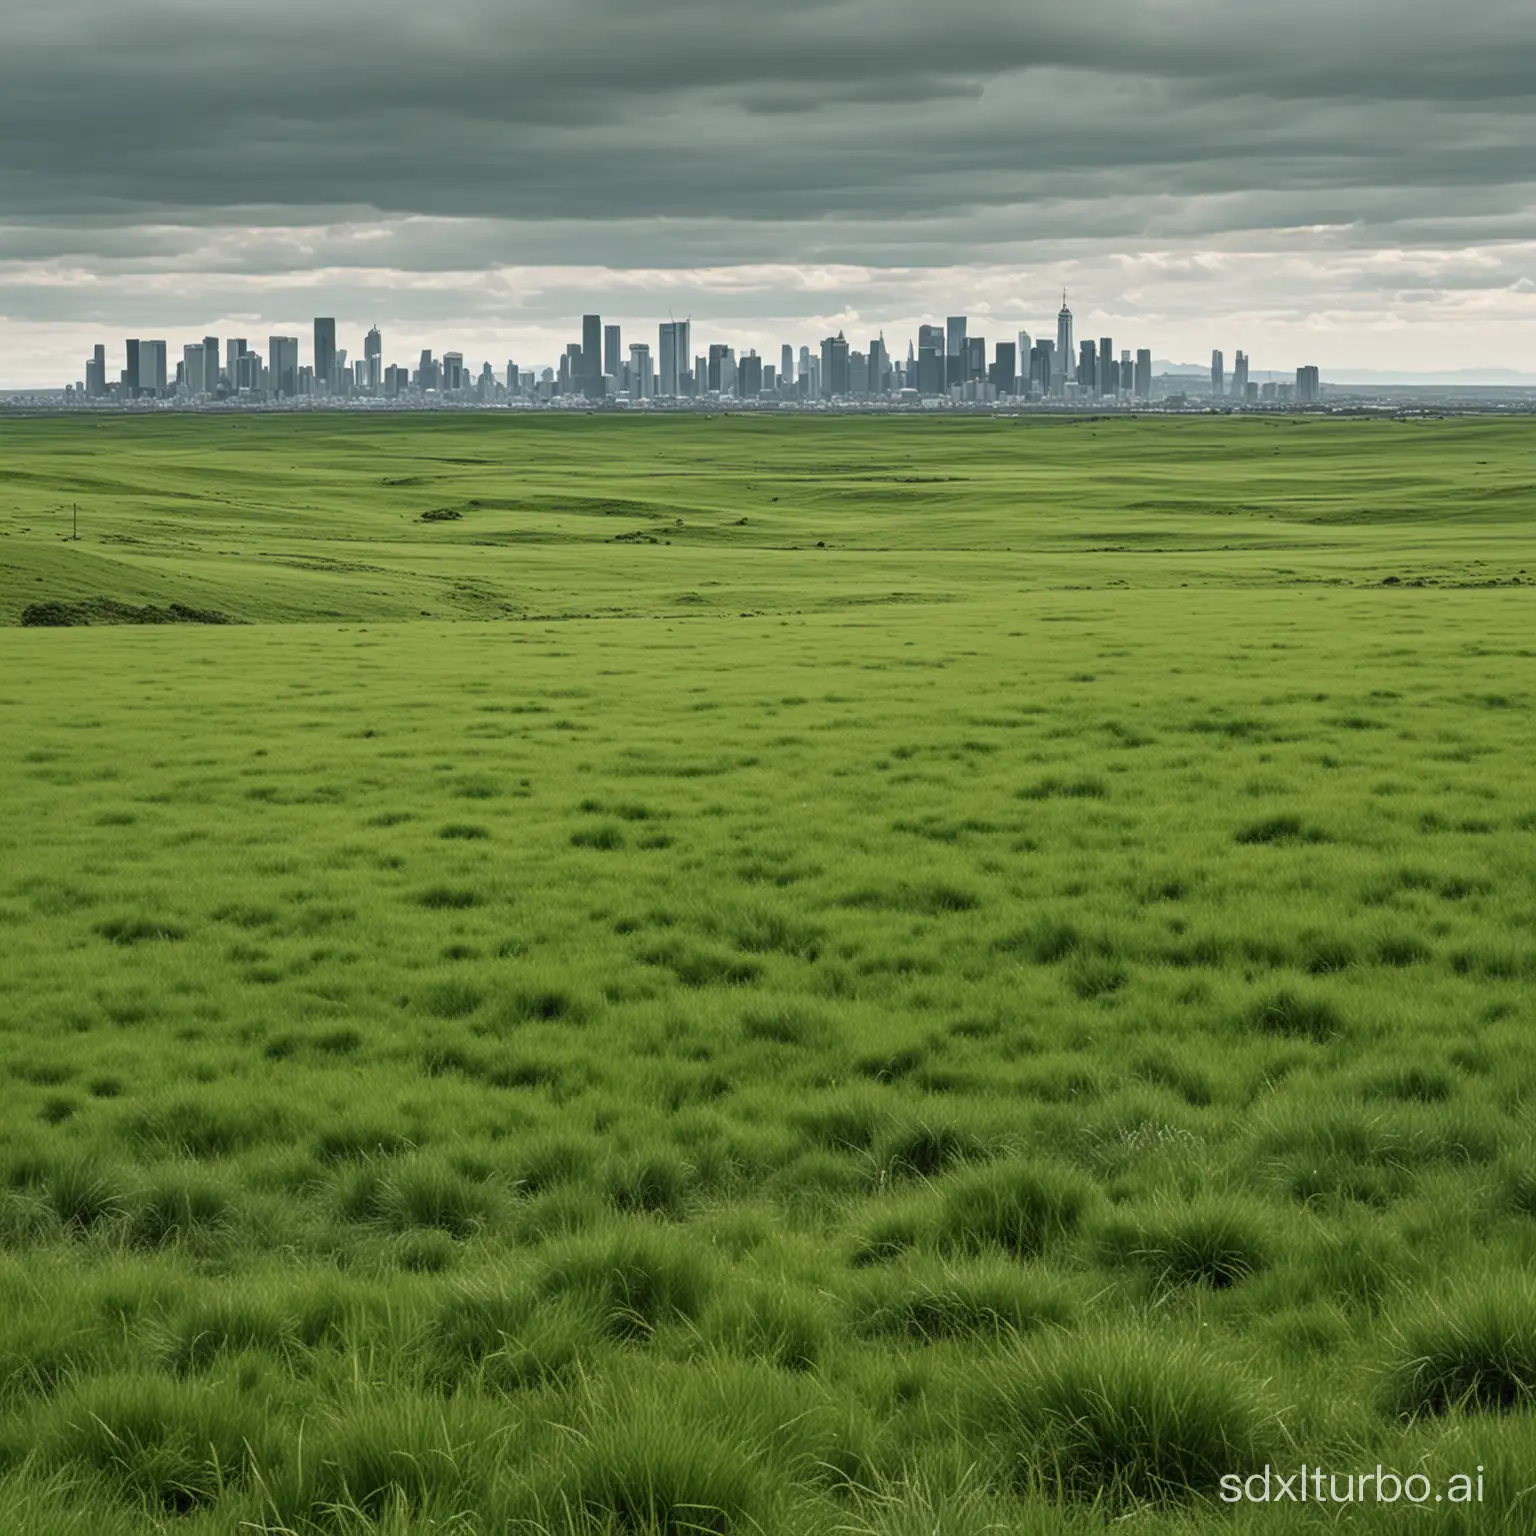 Scenic-Green-Grassland-with-Urban-Skyline-in-the-Distance